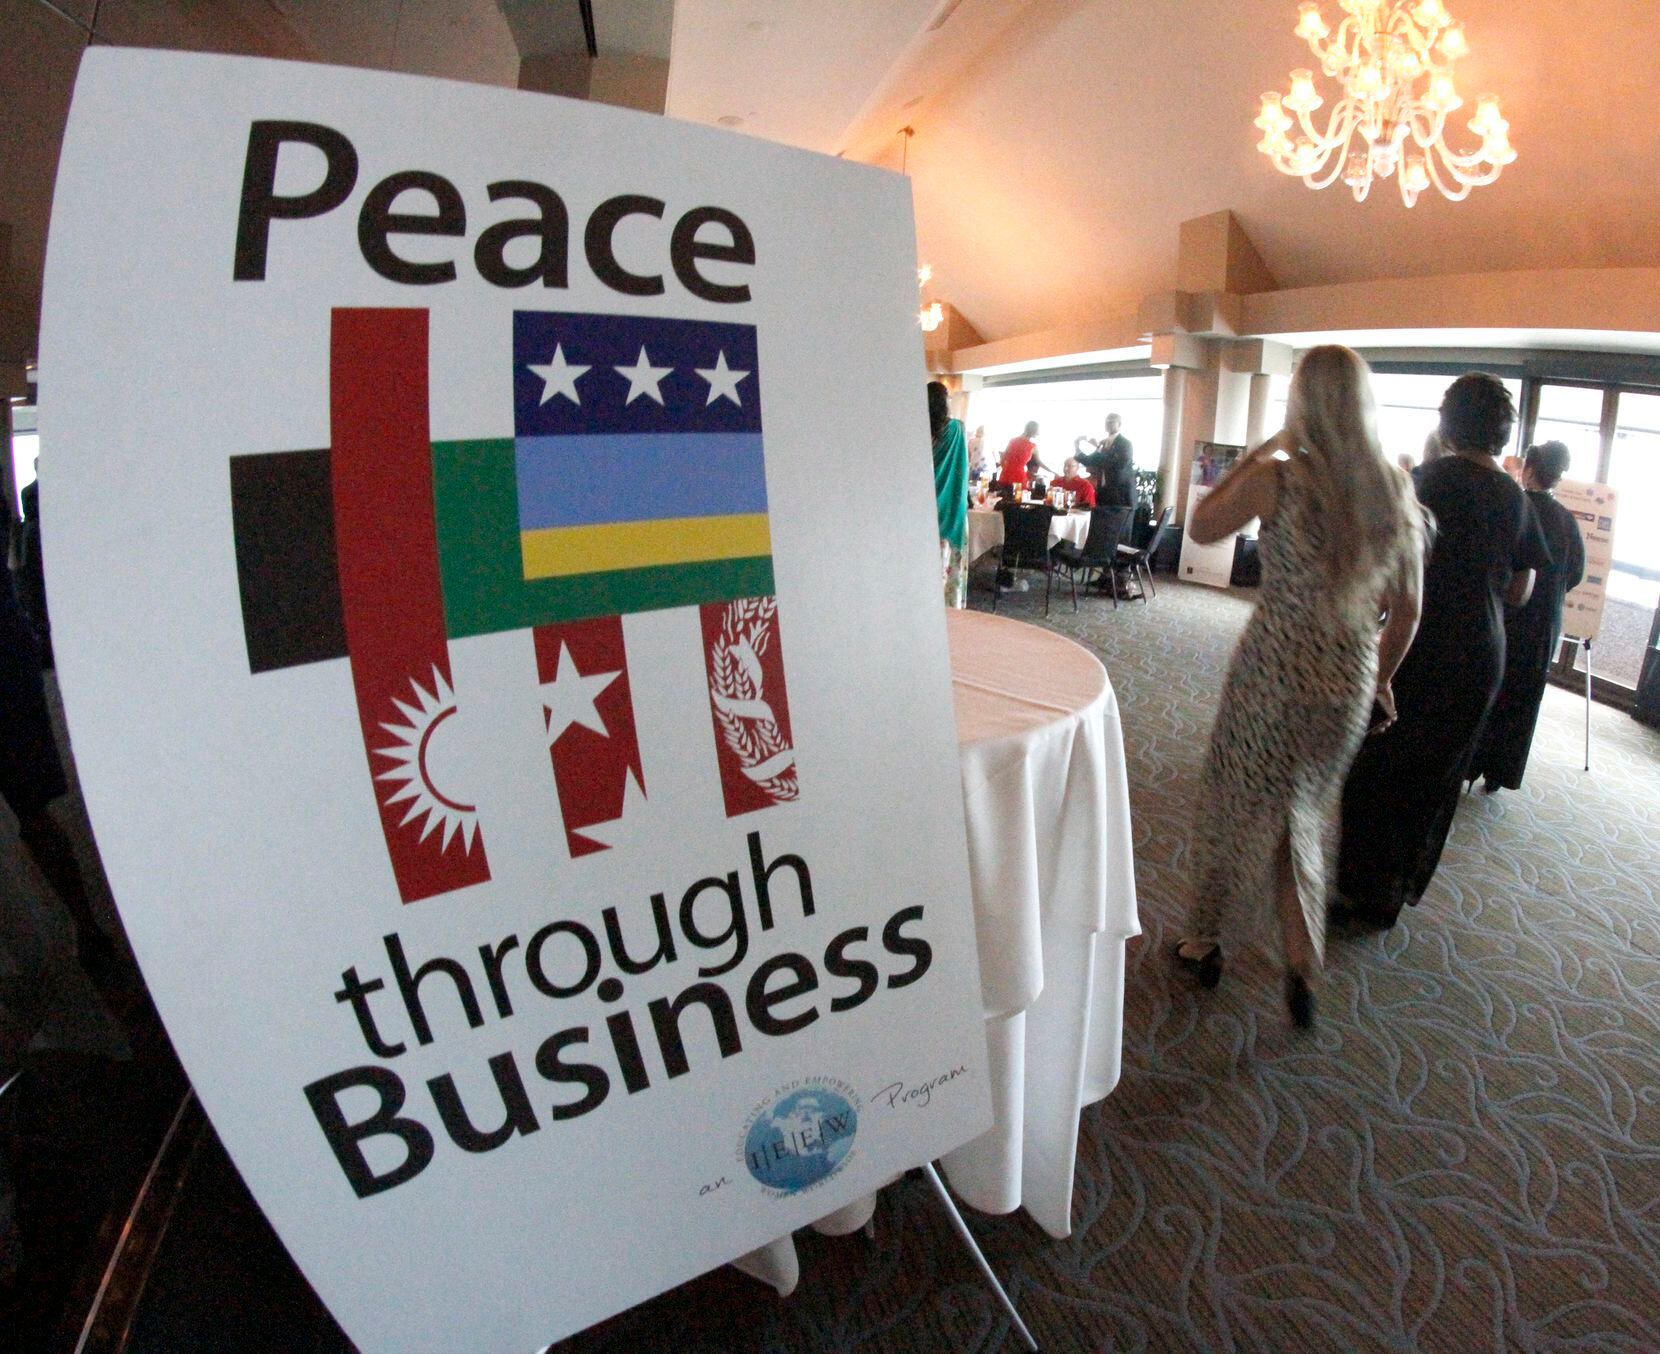 Honorees and their guests attended graduation ceremonies for attendees of the Peace Through...